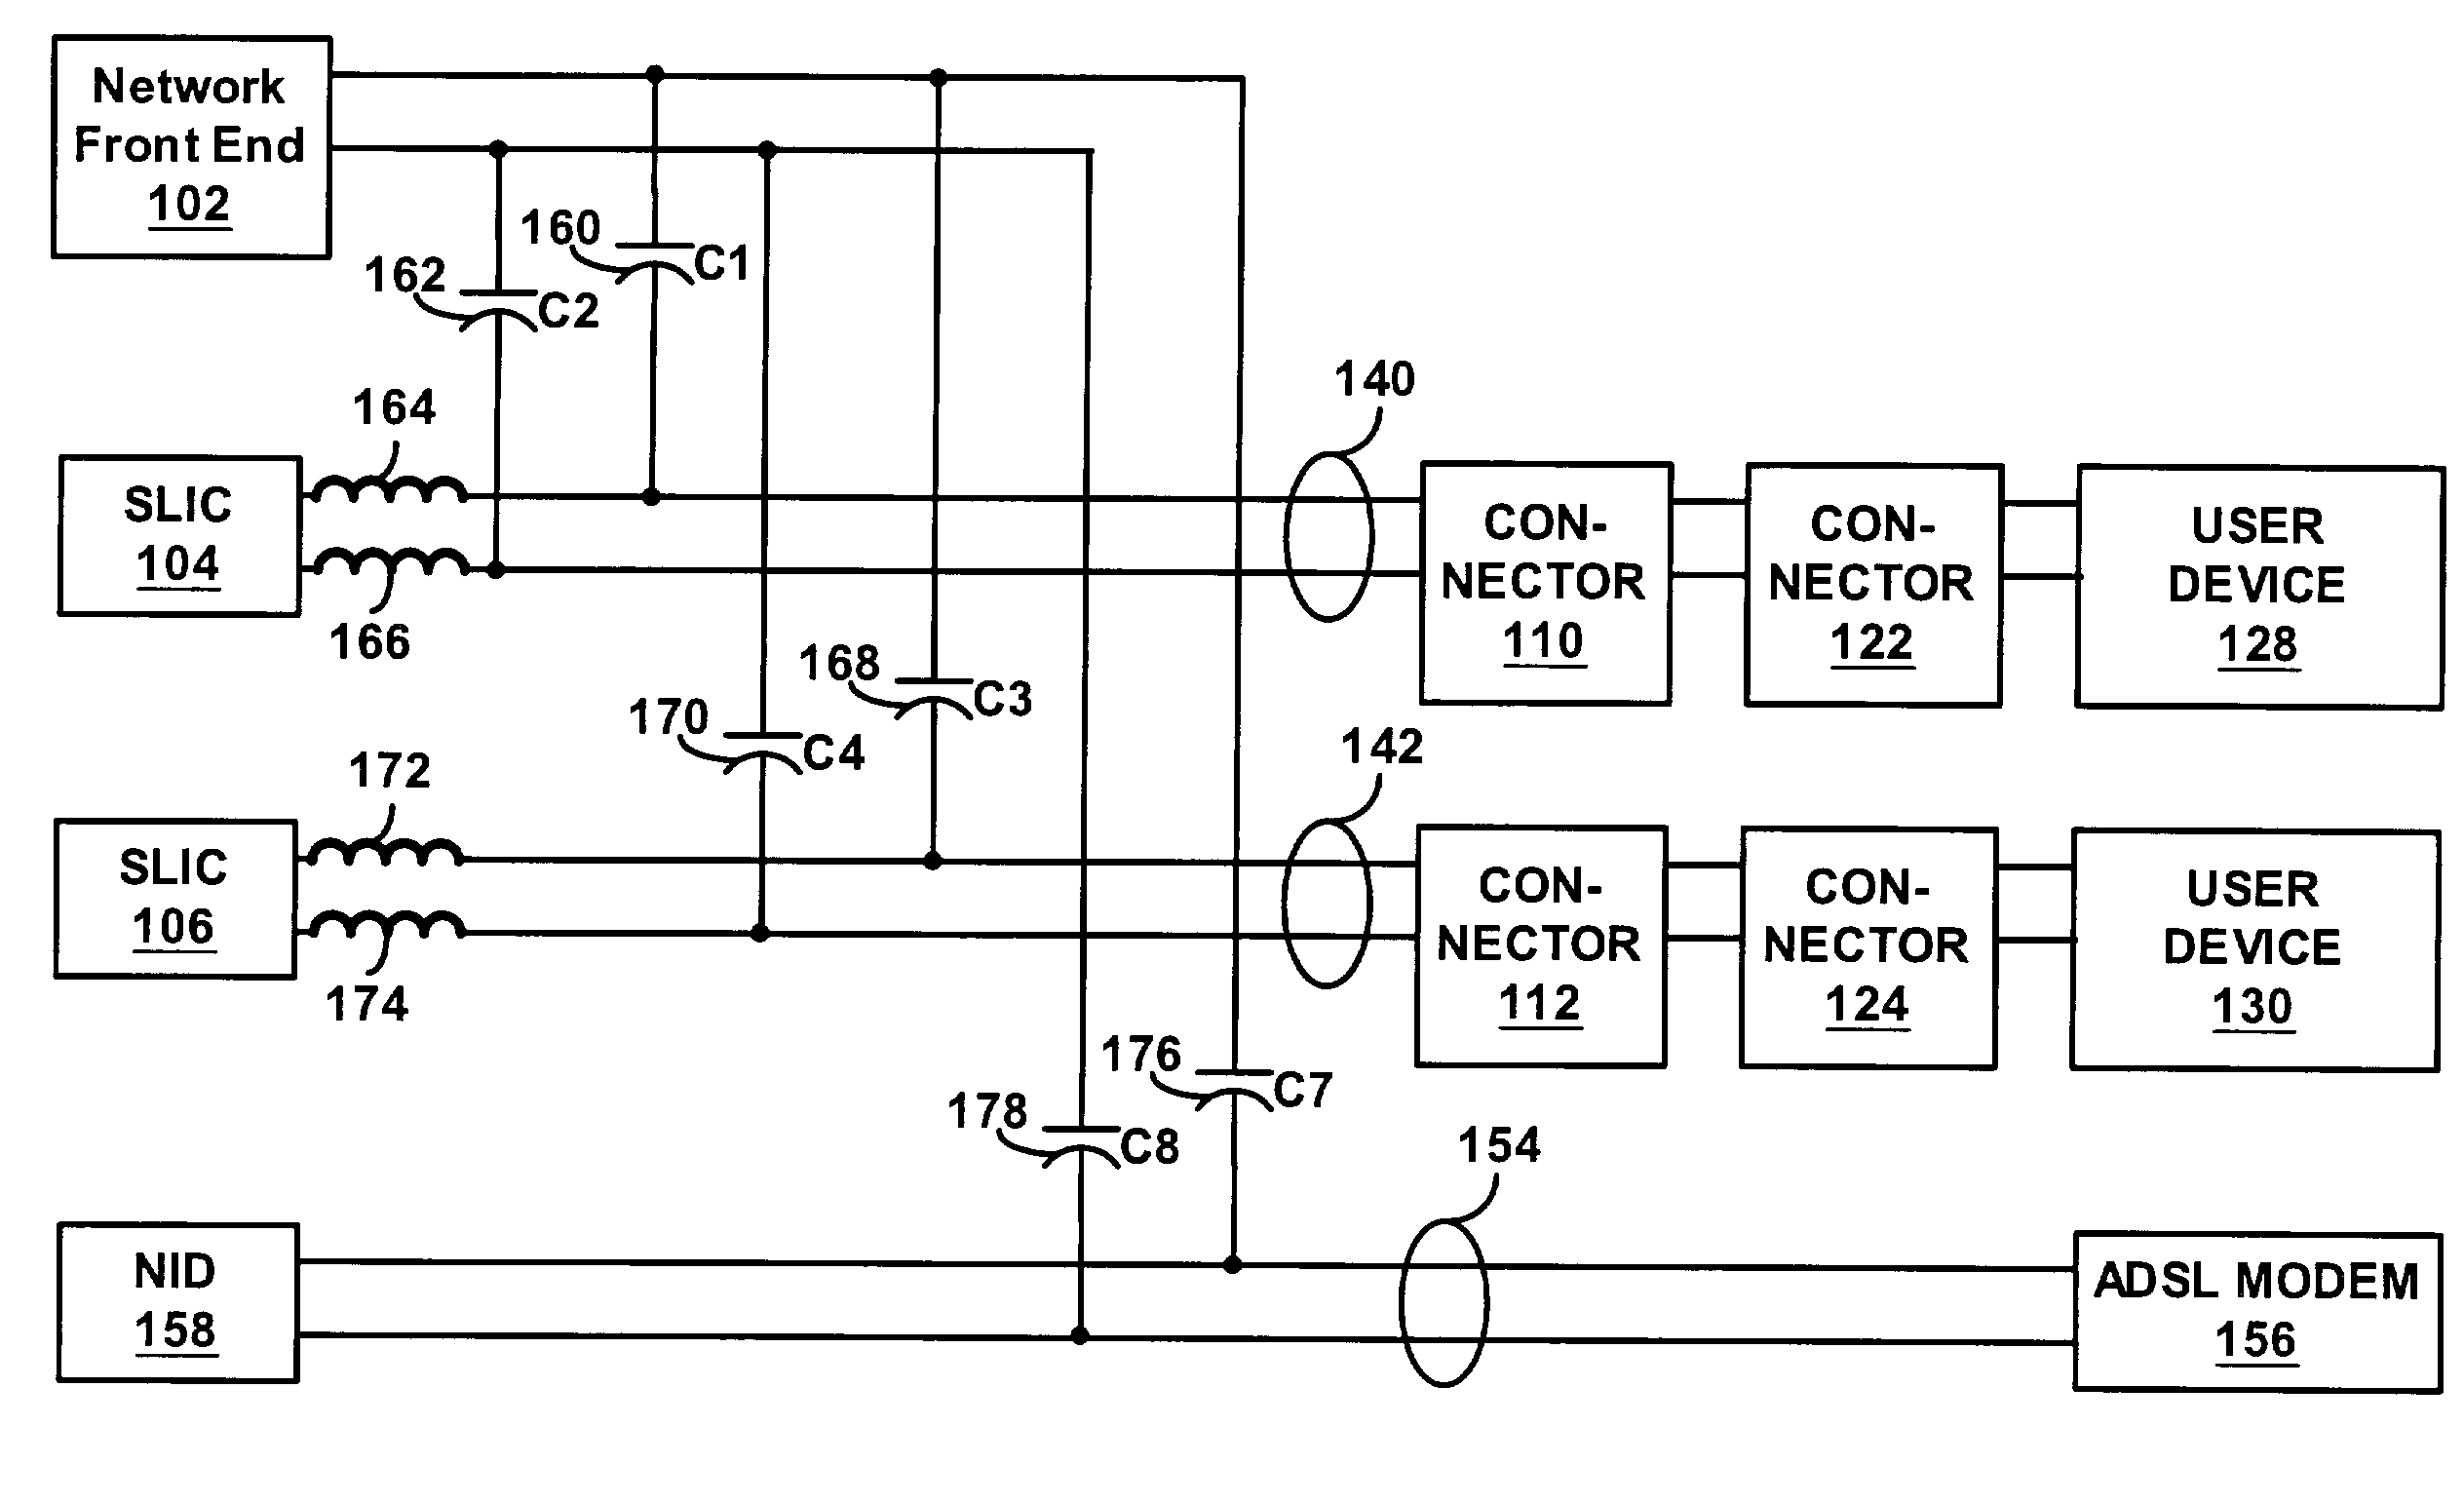 System for allowing a single device to share multiple transmission lines